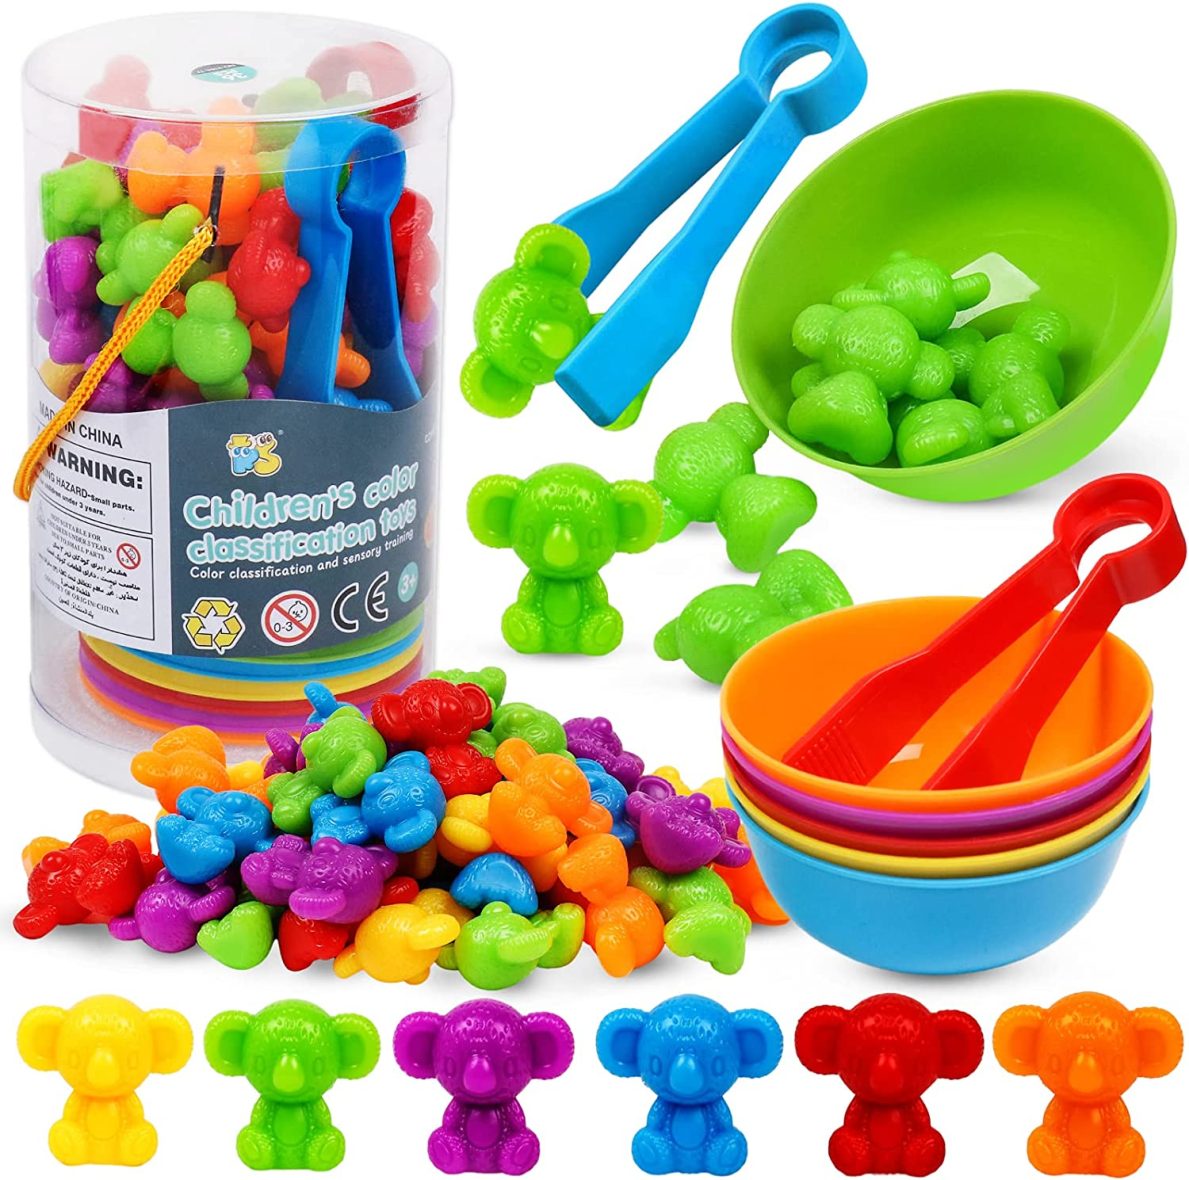 Colorful Counting Bears with Matching Cups – Sort, Count & Color Recognition Learning Toy